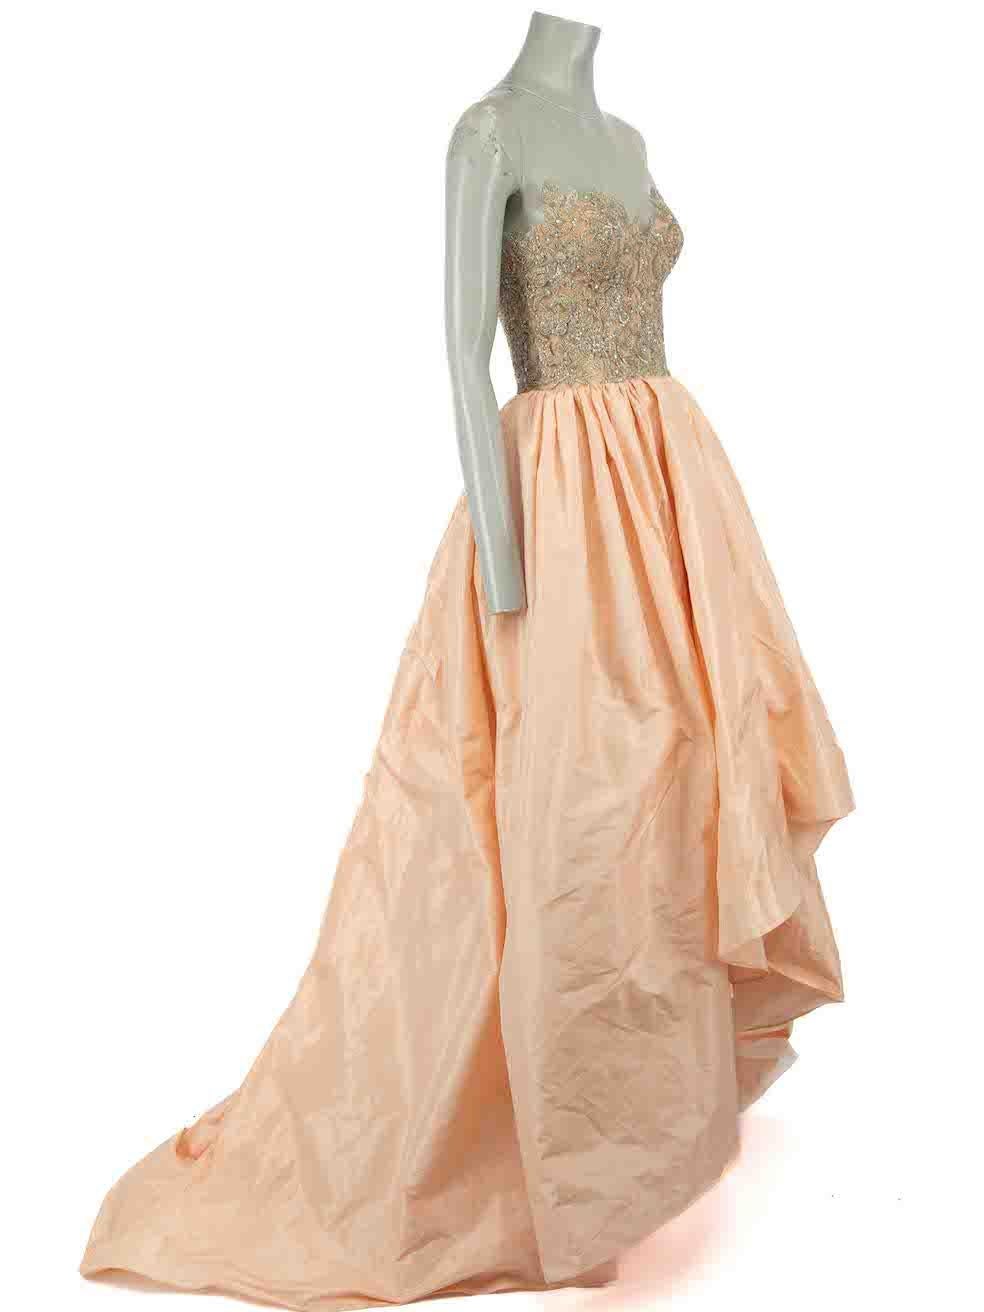 CONDITION is Very good. Hardly any visible wear to dresses is evident on this used Reem Acra designer resale item.
 
 Details
 Pink
 Silk
 Gown
 Sheer sleeveless top
 Embellished bodice
 High low skirt
 Side zip fastening
 Puffy skirt
 
 
 Made in